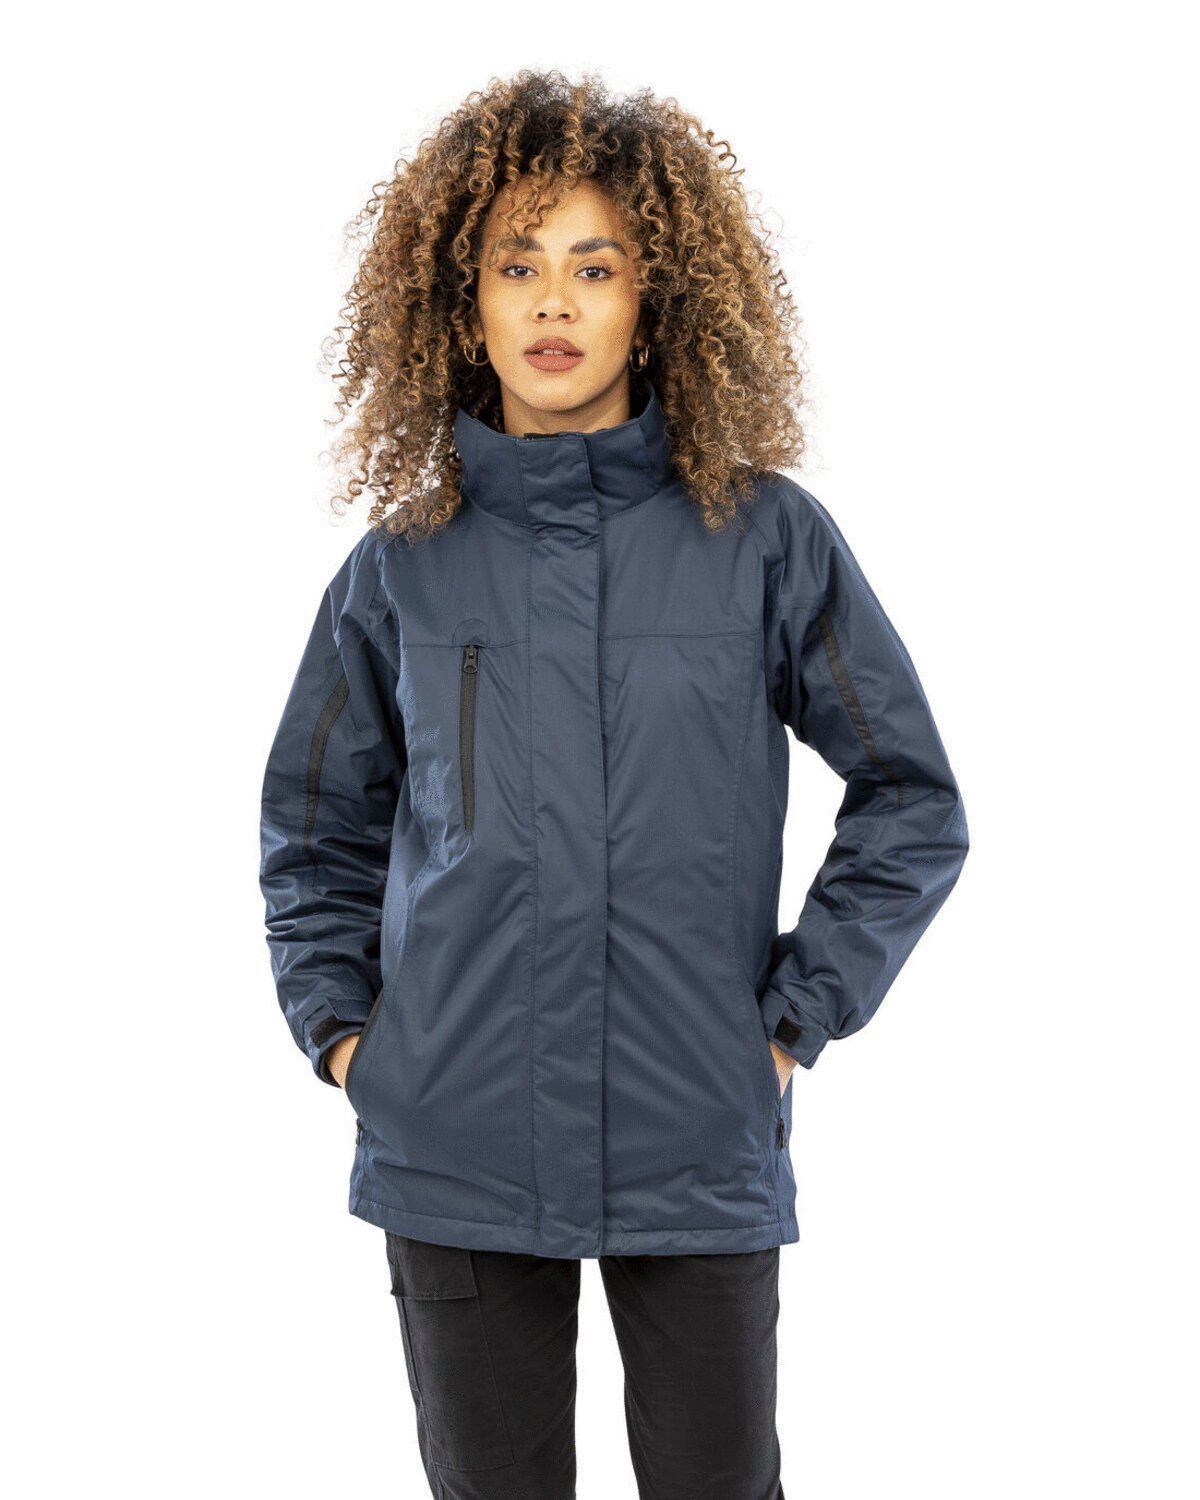 RS400F-LADIES 3-IN-1 JOURNEY JACKET WITH SOFTSHELL INNER